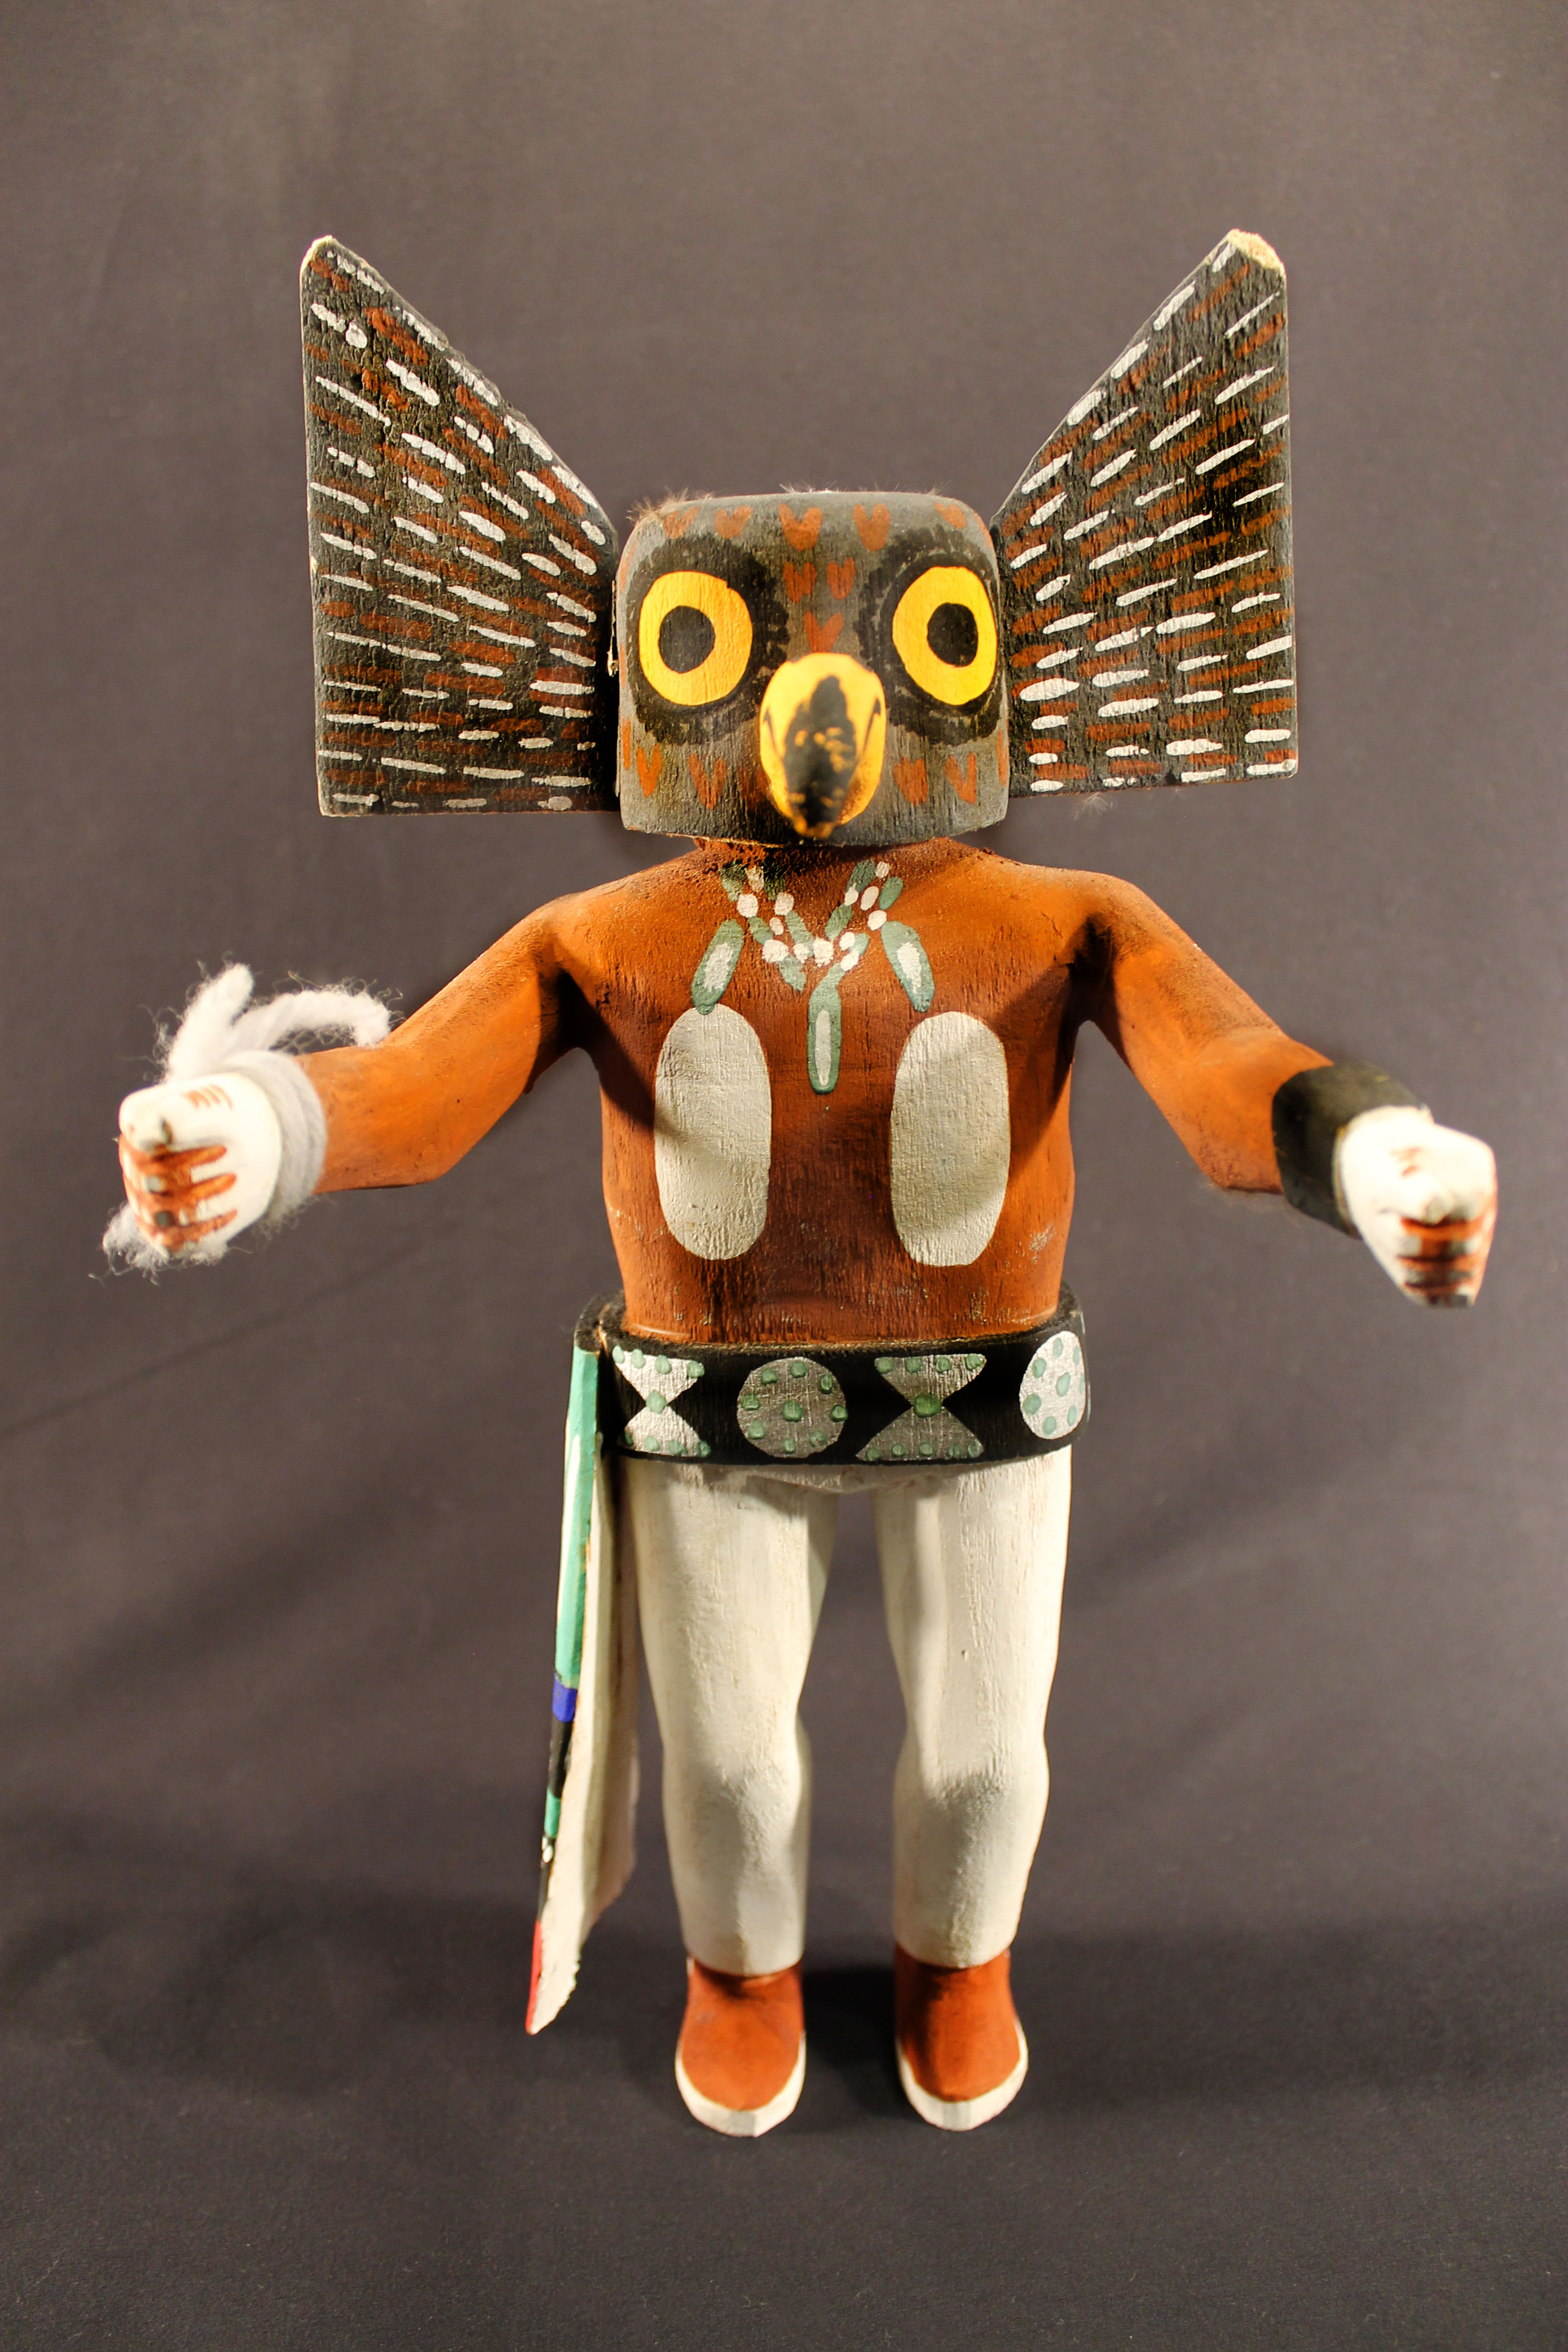 Painted wooden kachina doll that depicts a great horn owl spirit, which has a human body and an owl’s head. It has white-painted pants and a sash that are attached to a silver belt. The doll's upper body is brown with a white shape on the chest and hand and is wearing a painted silver necklace. 